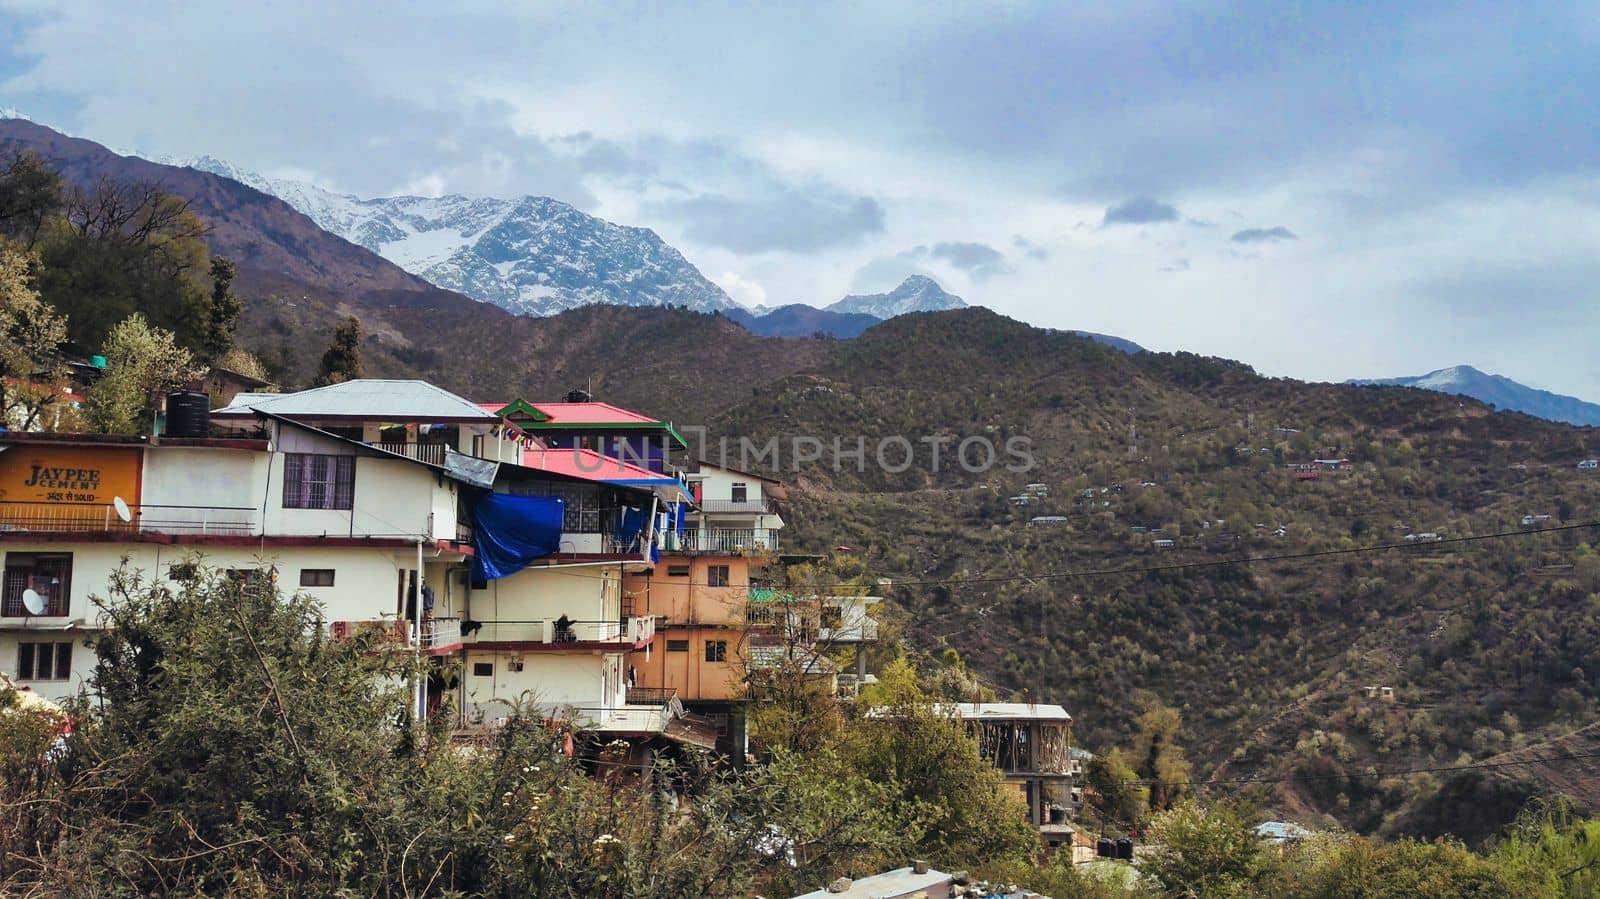 Simple Guesthouse in McLeod Ganj with Mountain Landscape, Dharamshala, India. High quality photo